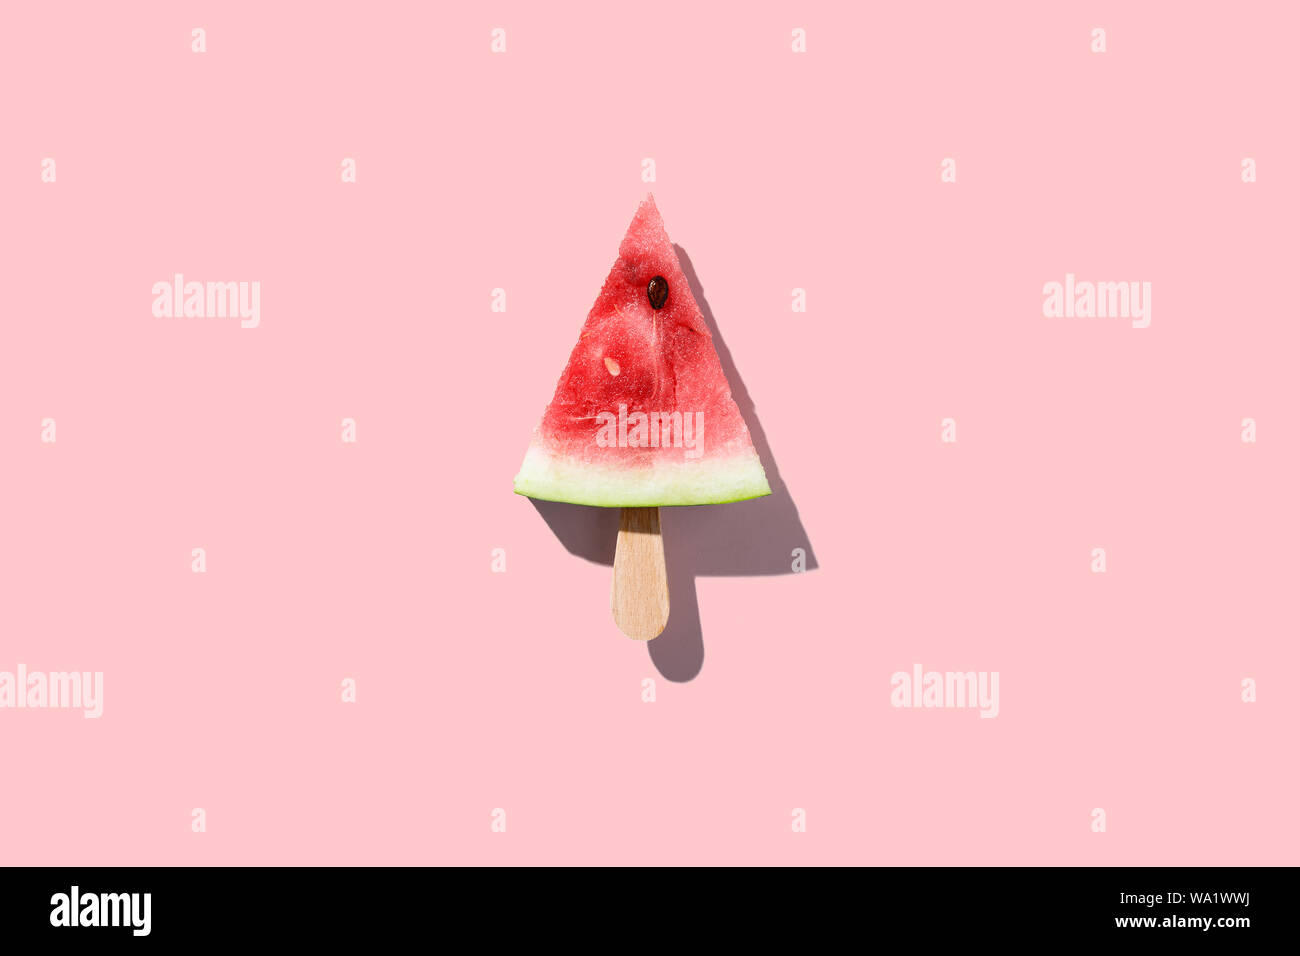 Watermelon slice popsicles on a pink color background Stock Photo